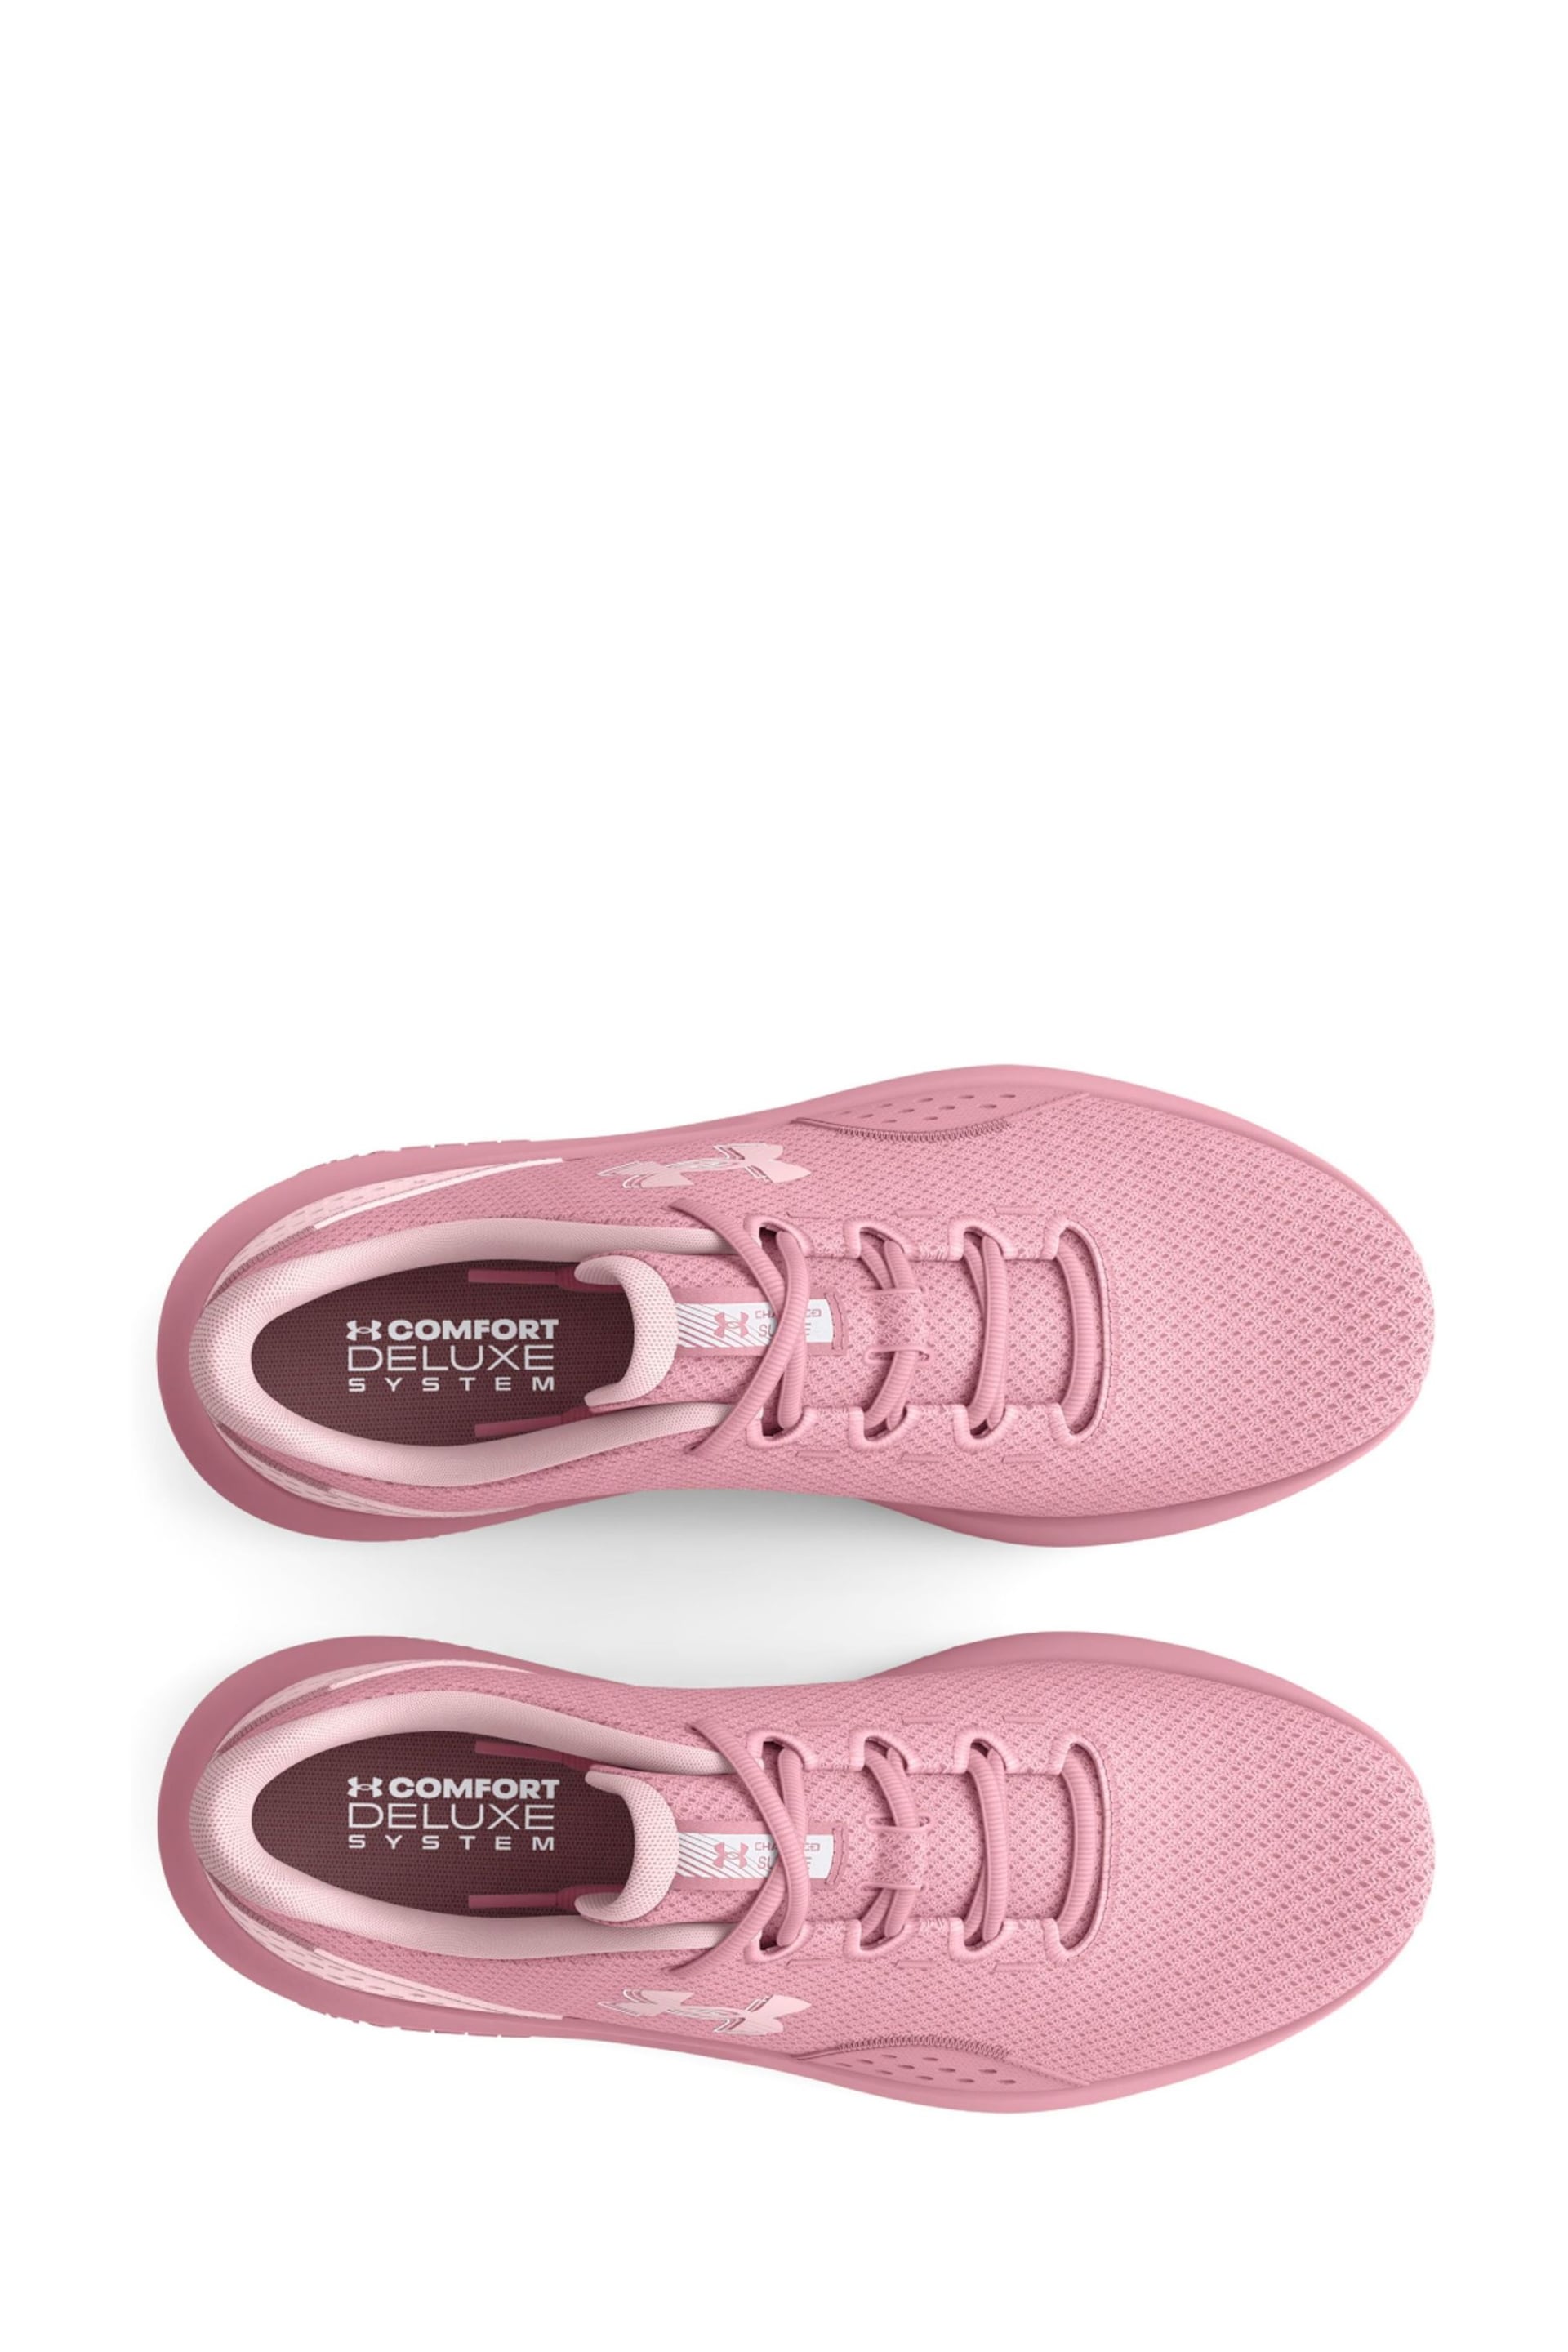 Under Armour Pink Charged Surge Trainers - Image 5 of 6